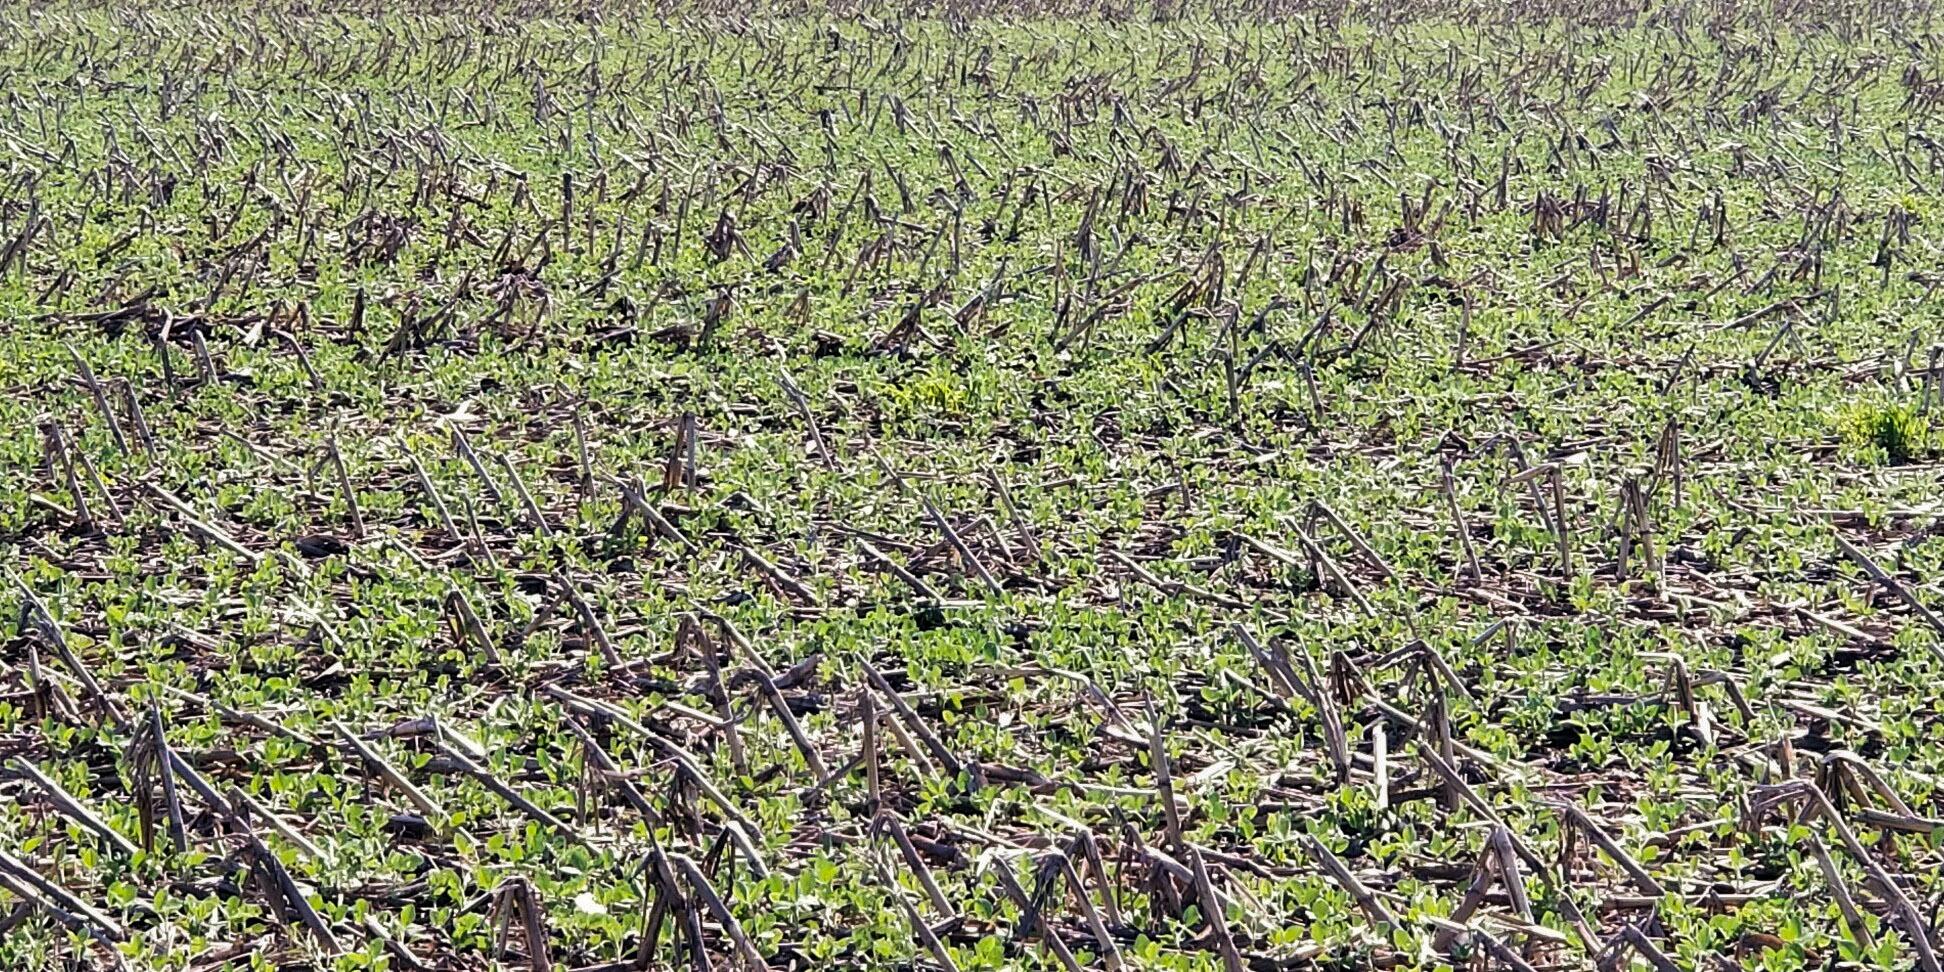 No-till practices in vulnerable areas significantly reduce soil erosion